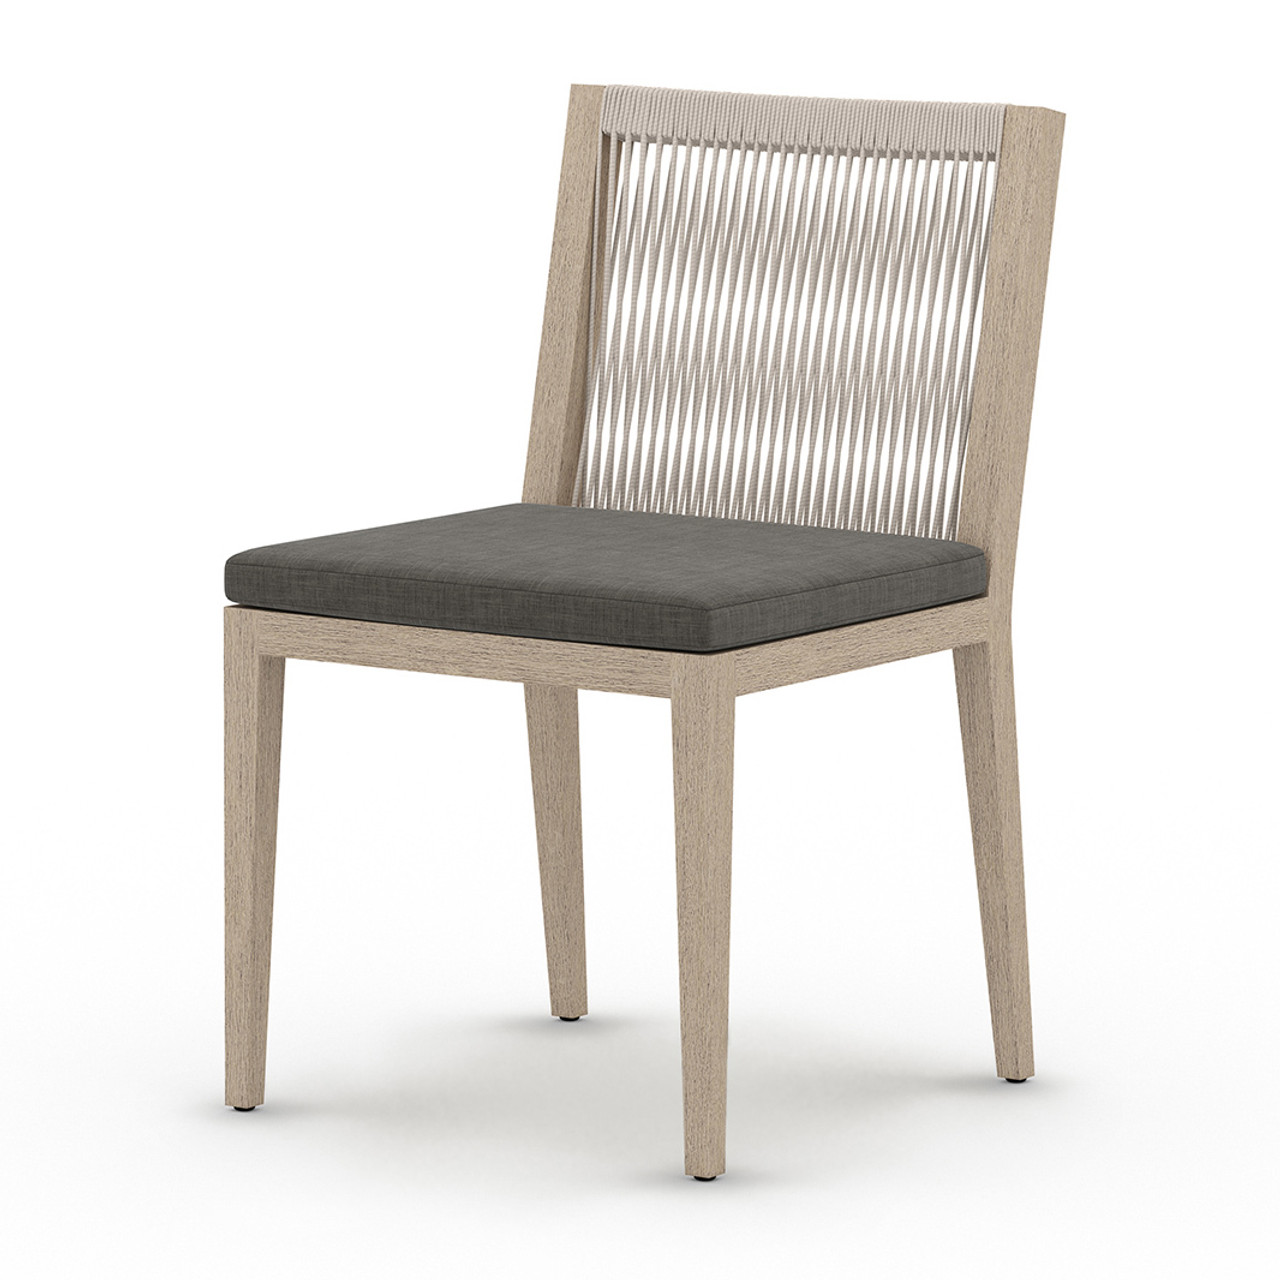 Silhouette Teak Outdoor Dining Chair